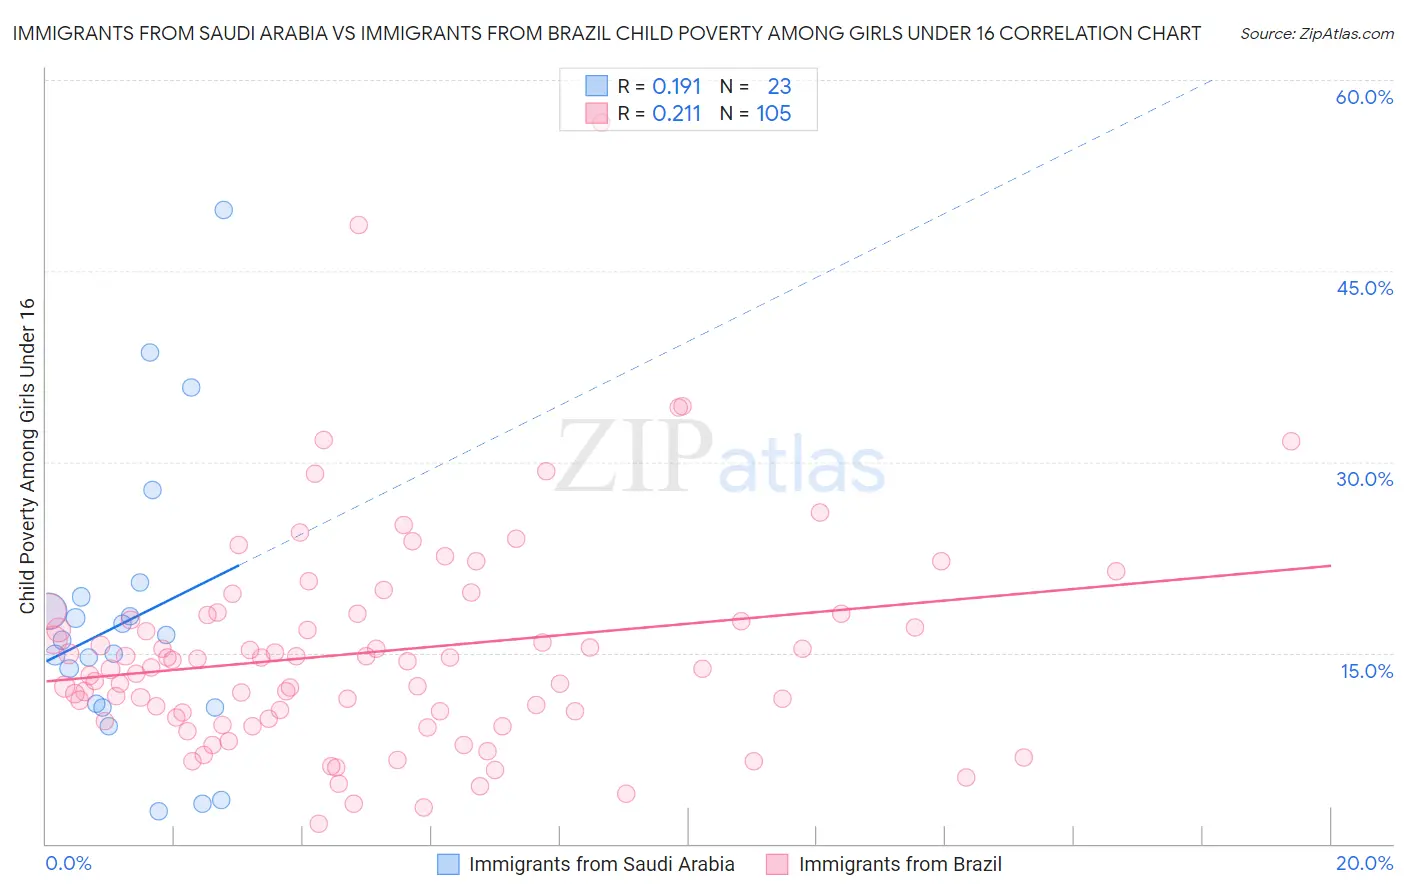 Immigrants from Saudi Arabia vs Immigrants from Brazil Child Poverty Among Girls Under 16